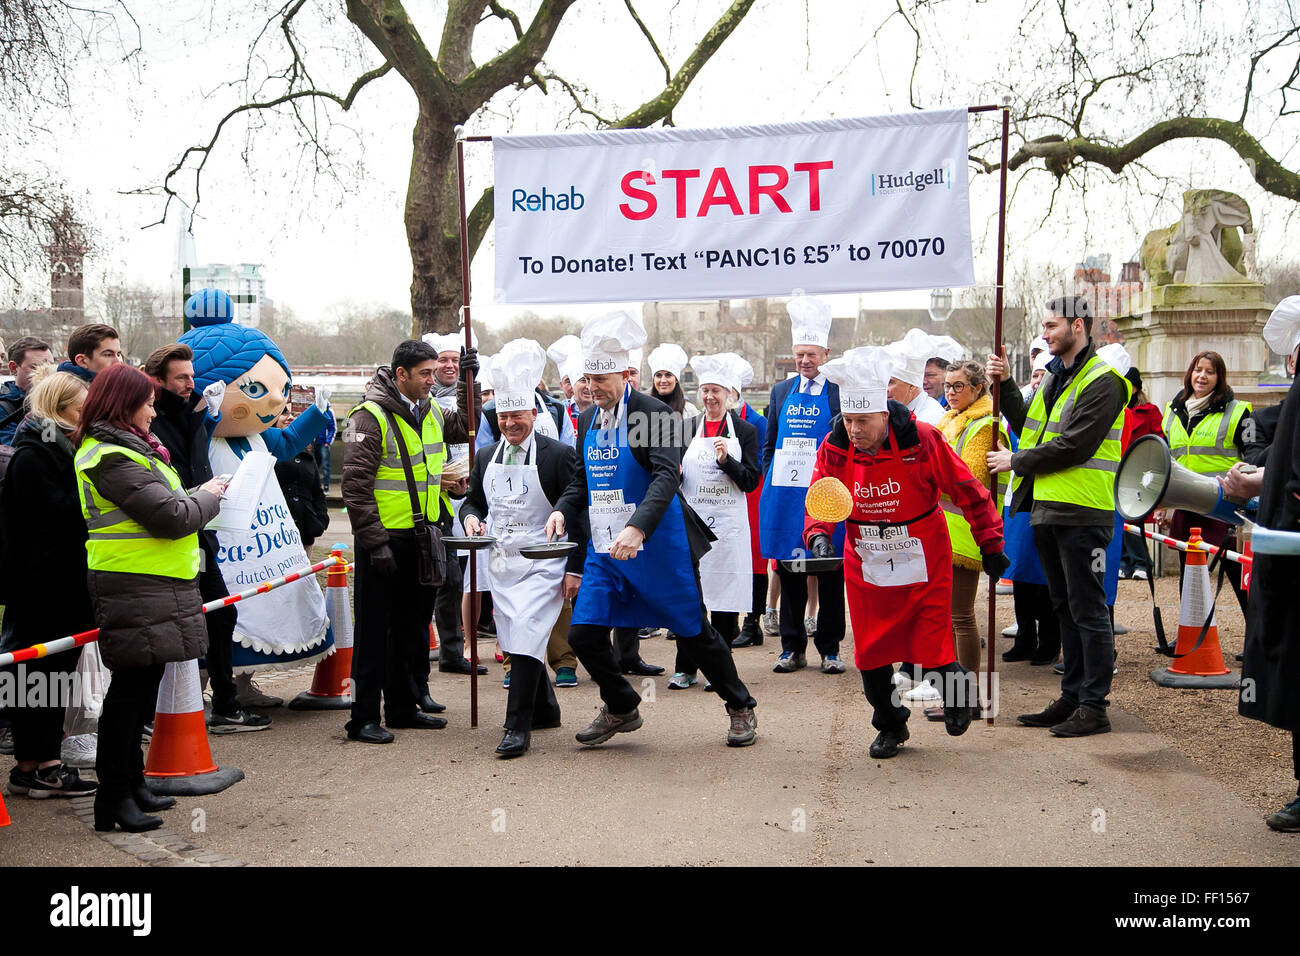 Westminster, London, United Kingdom. February 9th, 2016 -  The annual Parliamentary pancake race in Victoria Gardens, Westminster. Members of the Lords, MPs and the media participates in the race. Credit:  Dinendra Haria/Alamy Live News Stock Photo